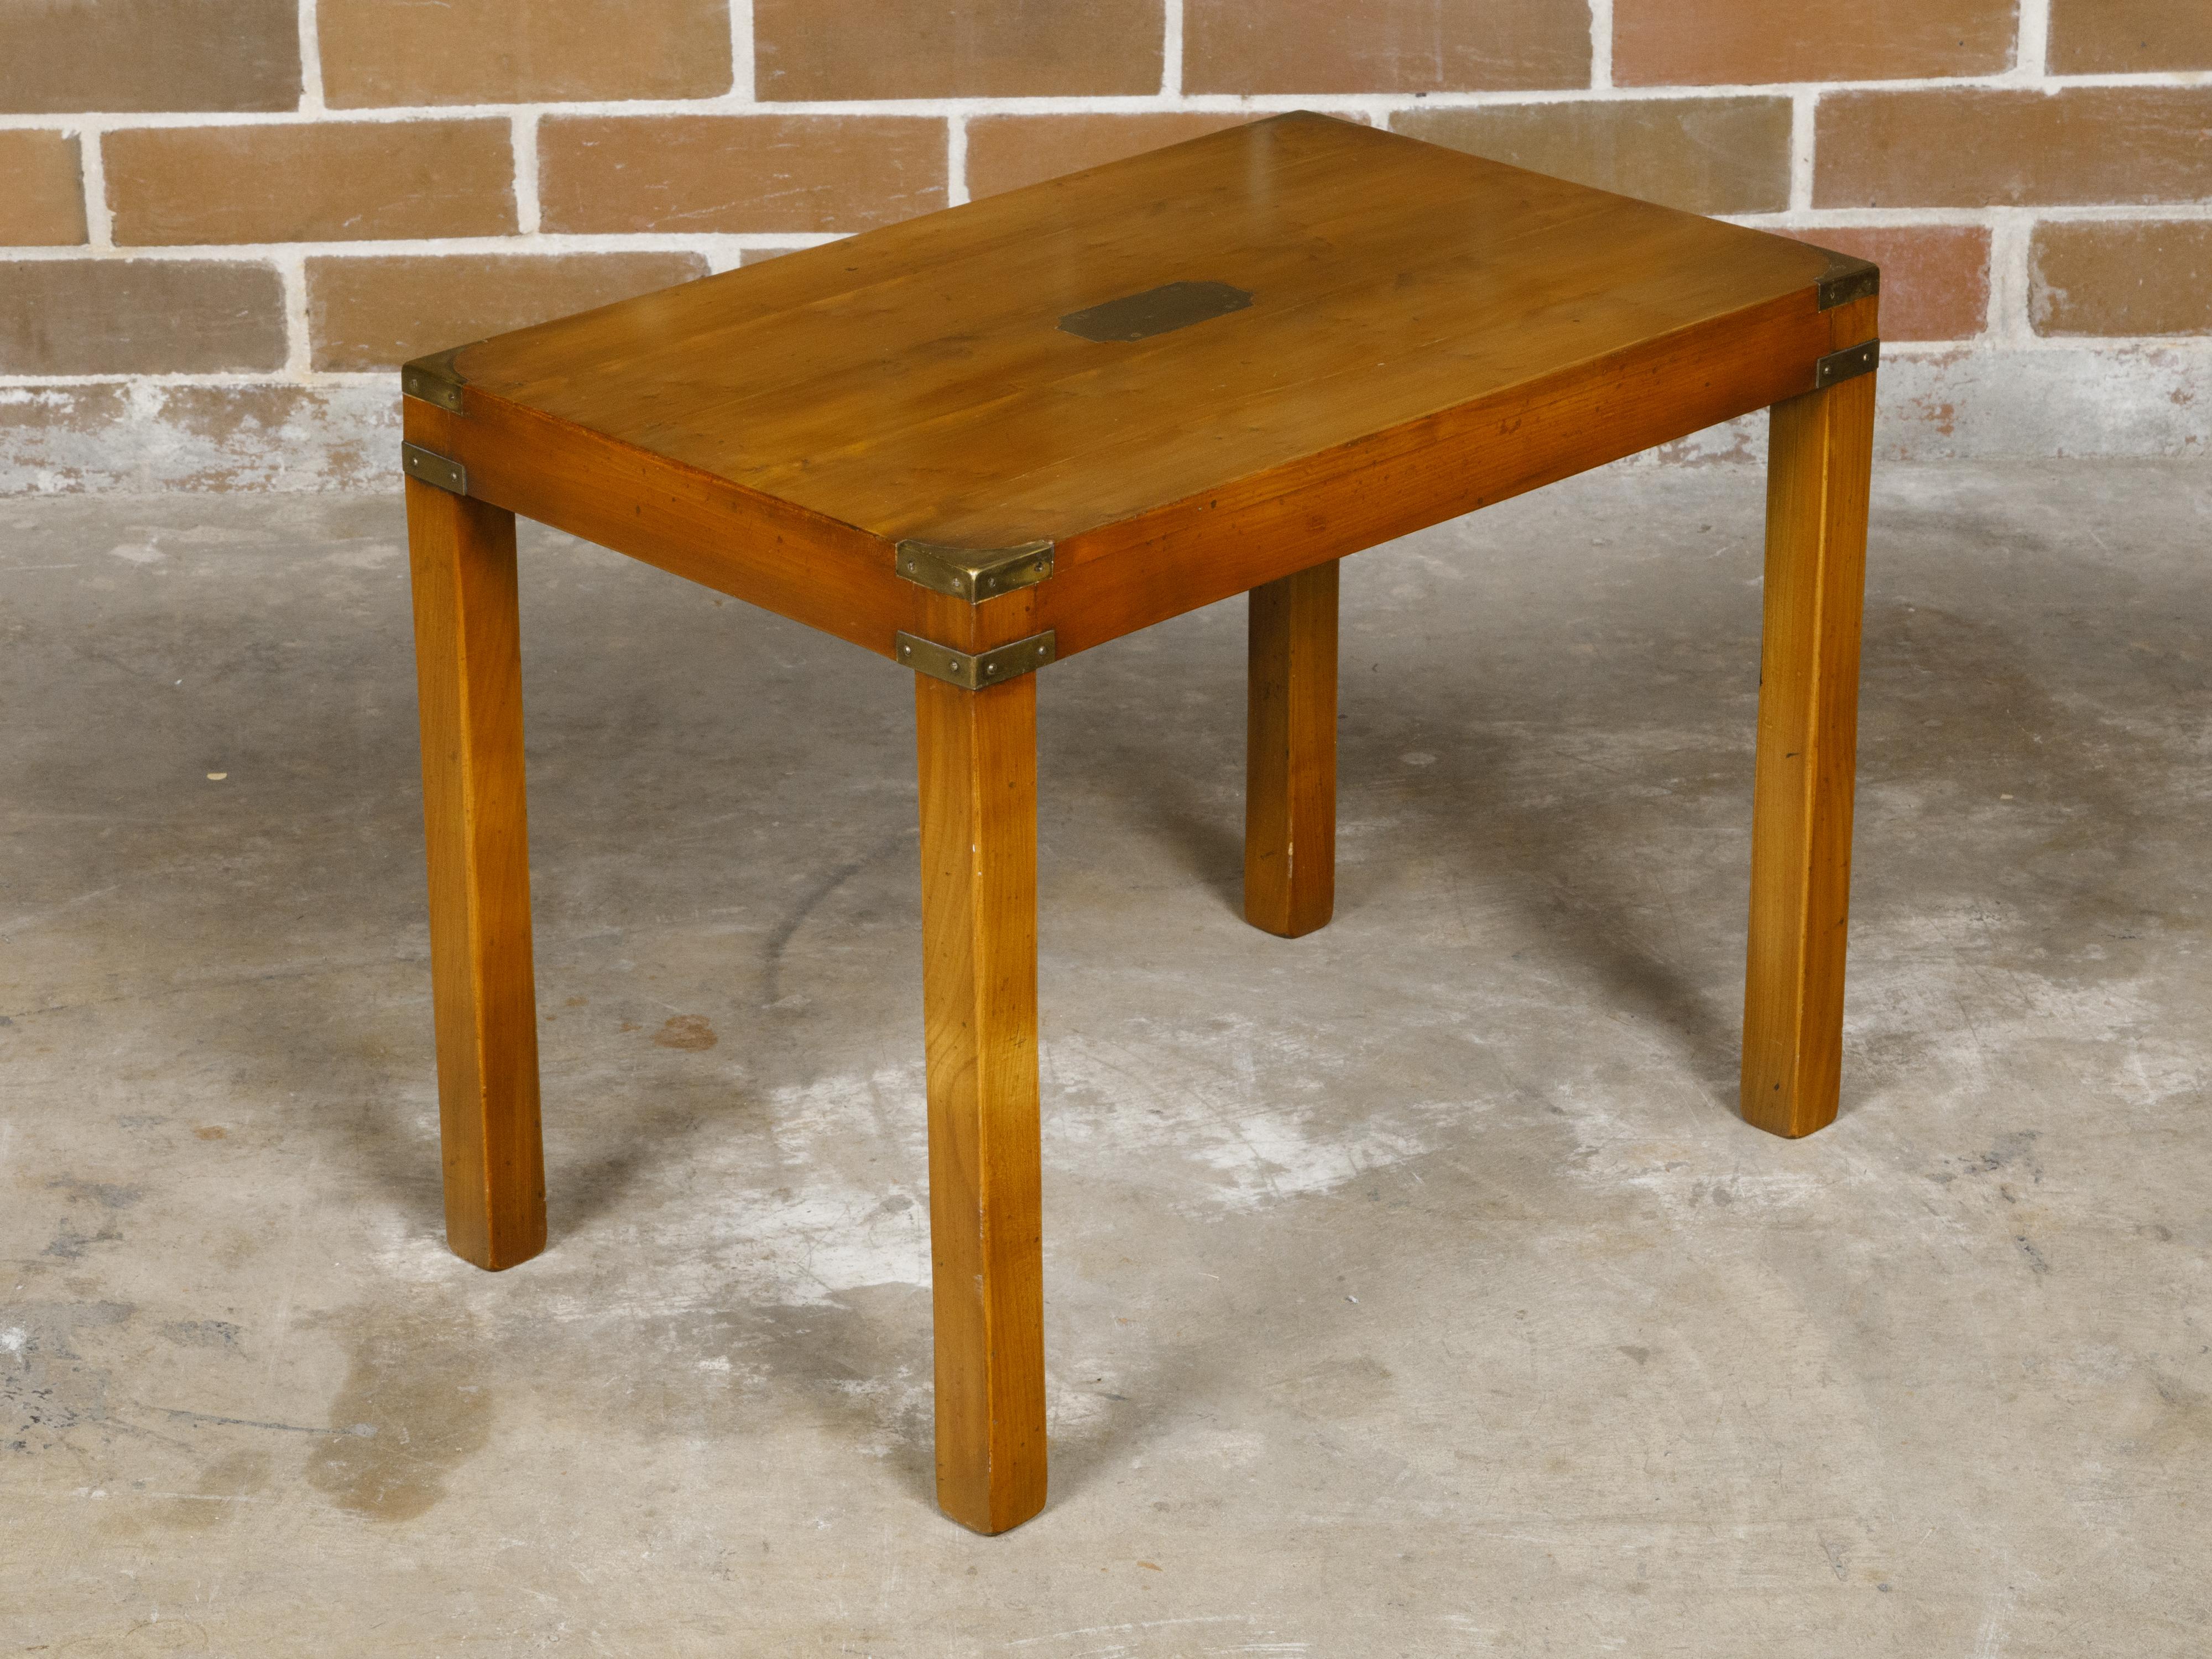 English Campaign Yew Wood 1920s Side Table with Brass Accents and Straight Legs For Sale 4